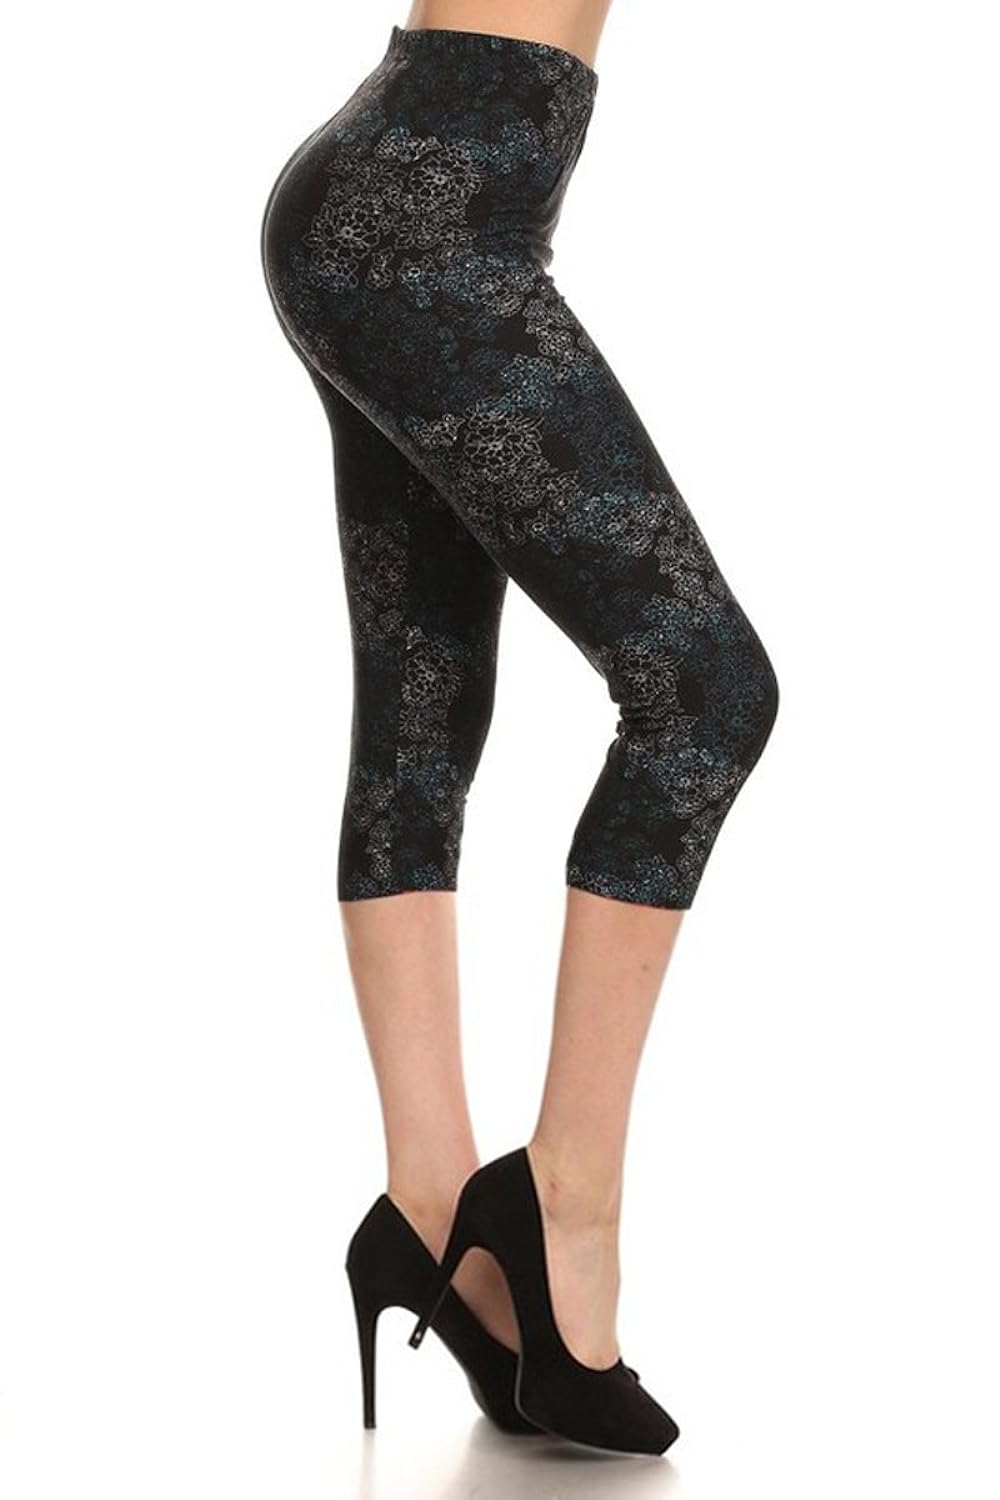 In the realm of women's fashion, women best leggings have emerged as a versatile and essential wardrobe staple.